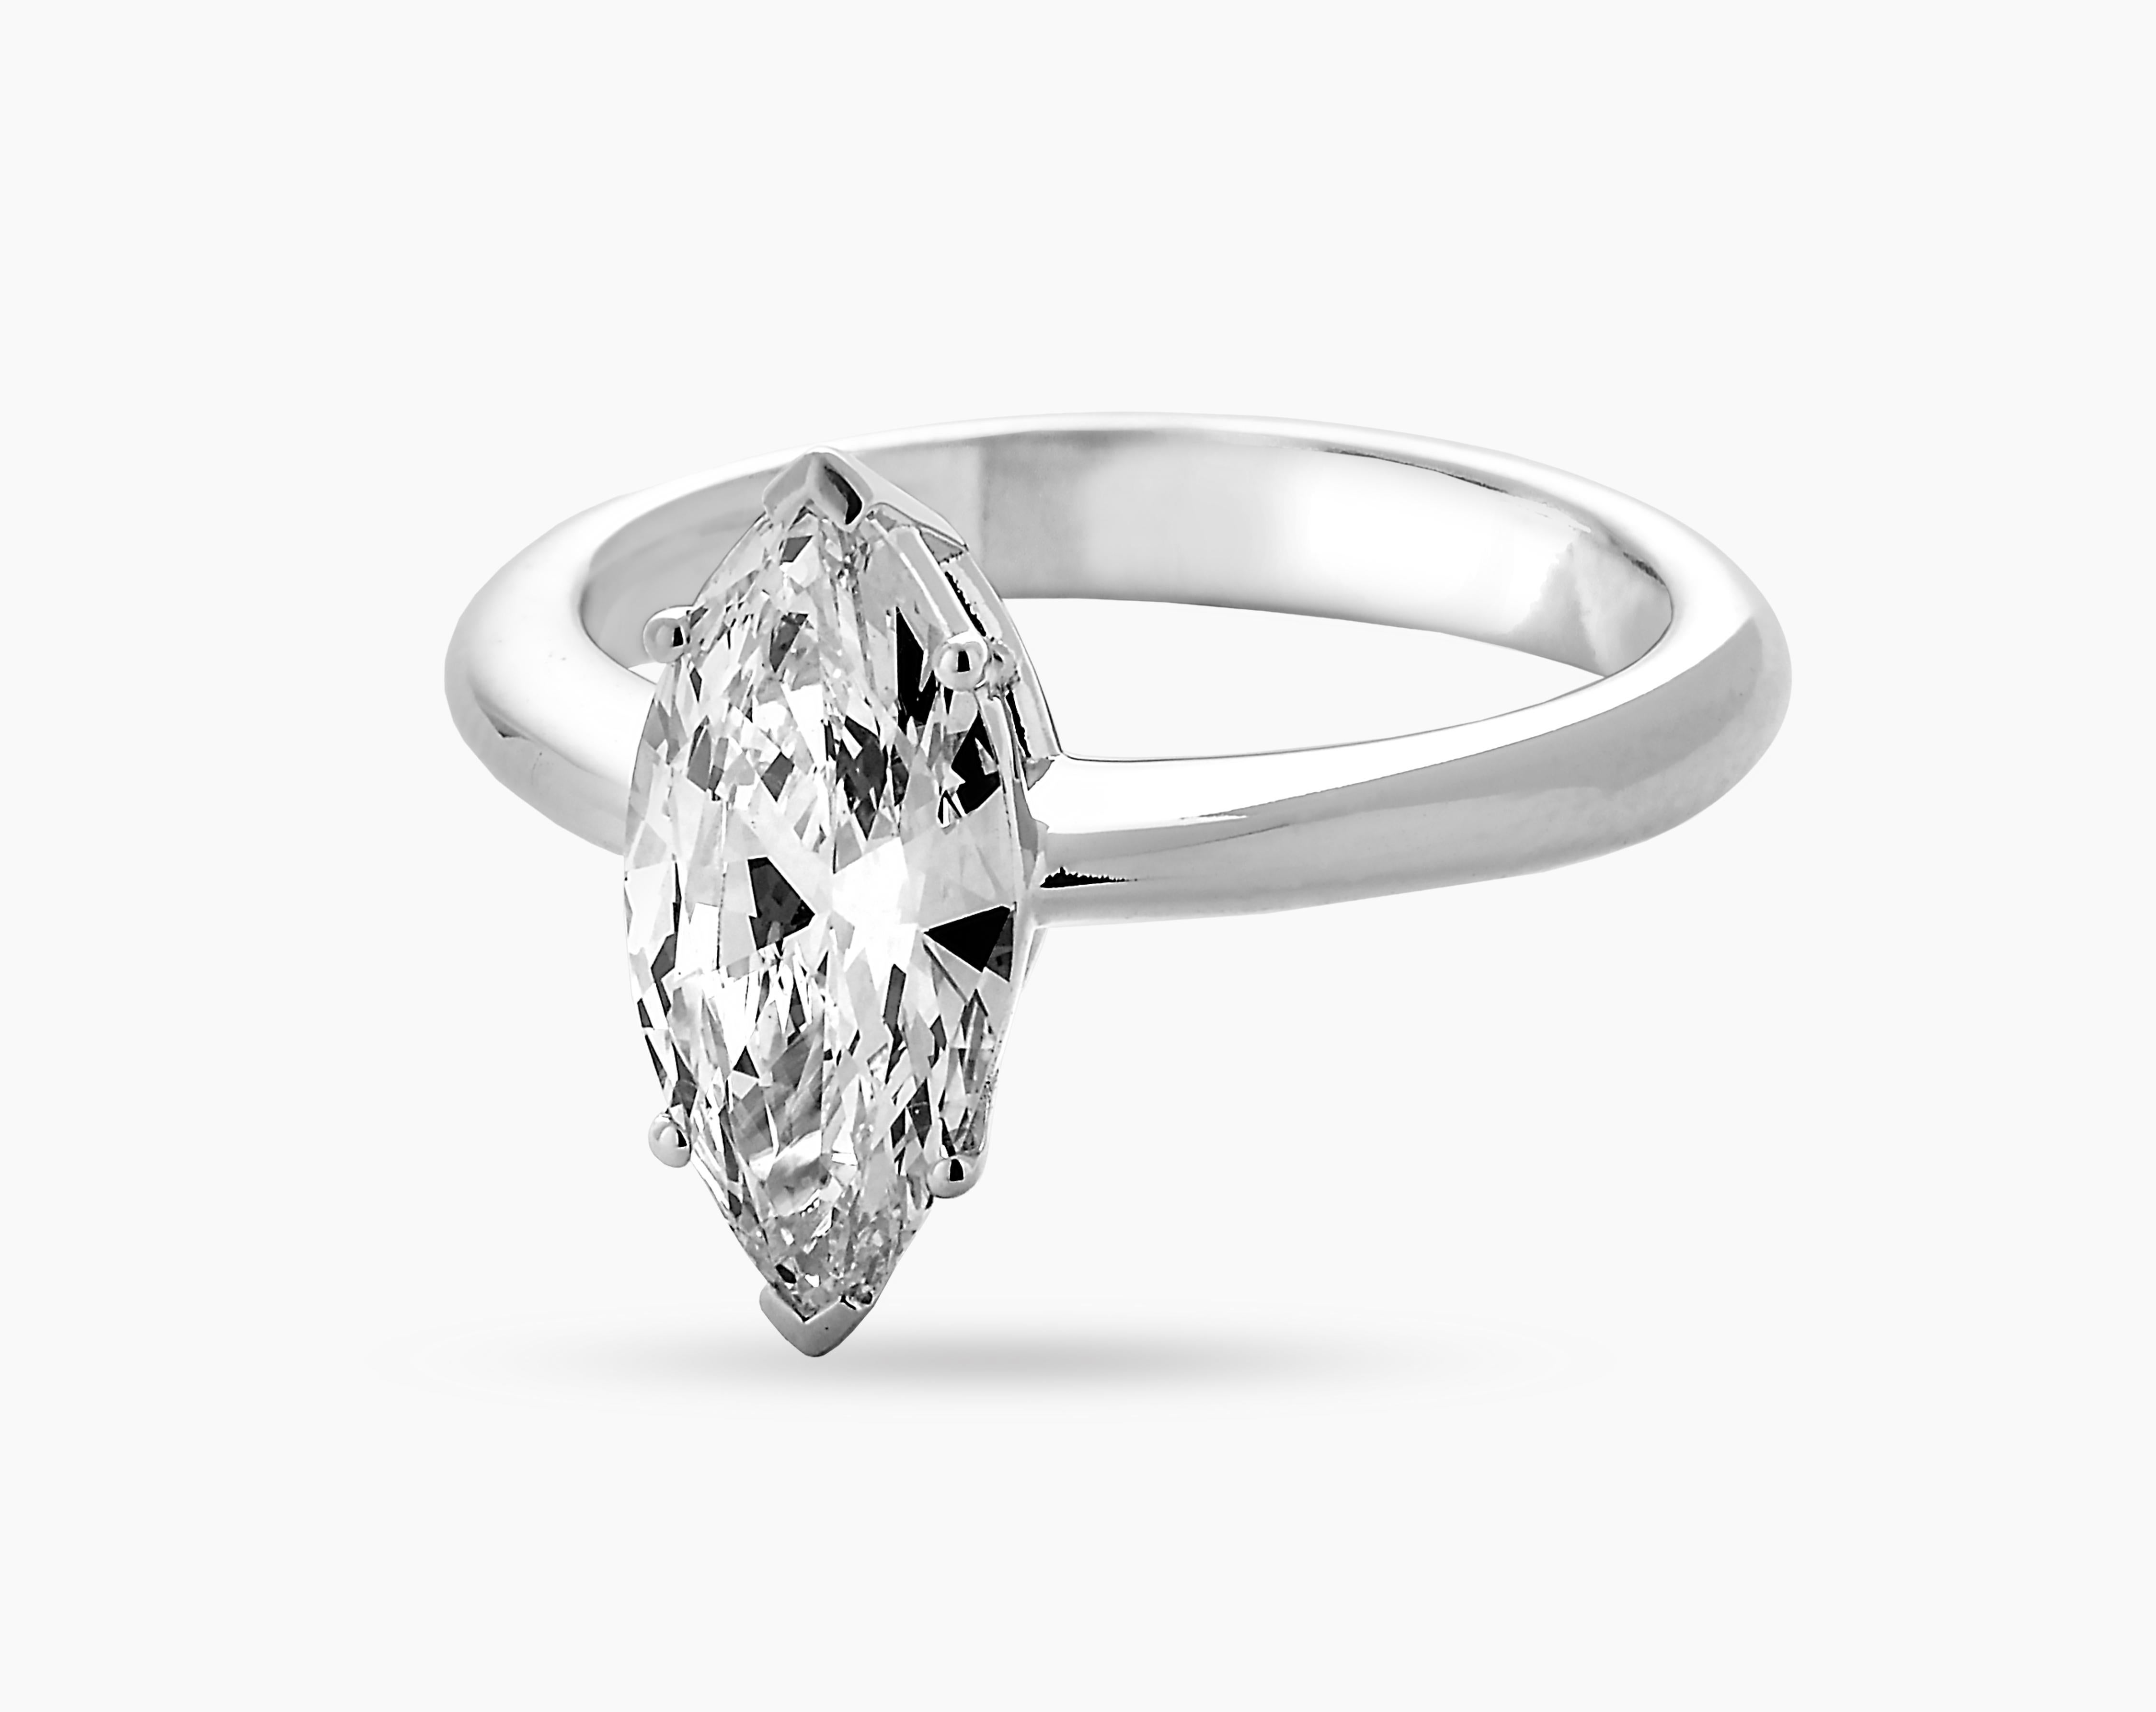 This stunning 18-karat white gold solitaire ring is set with a natural 1.62-carat diamond in marquise cut. This diamond is graded with color E, Clarity VVS2, None fluorescence. Lab report from IGI is available.
This beautiful engagement ring has a